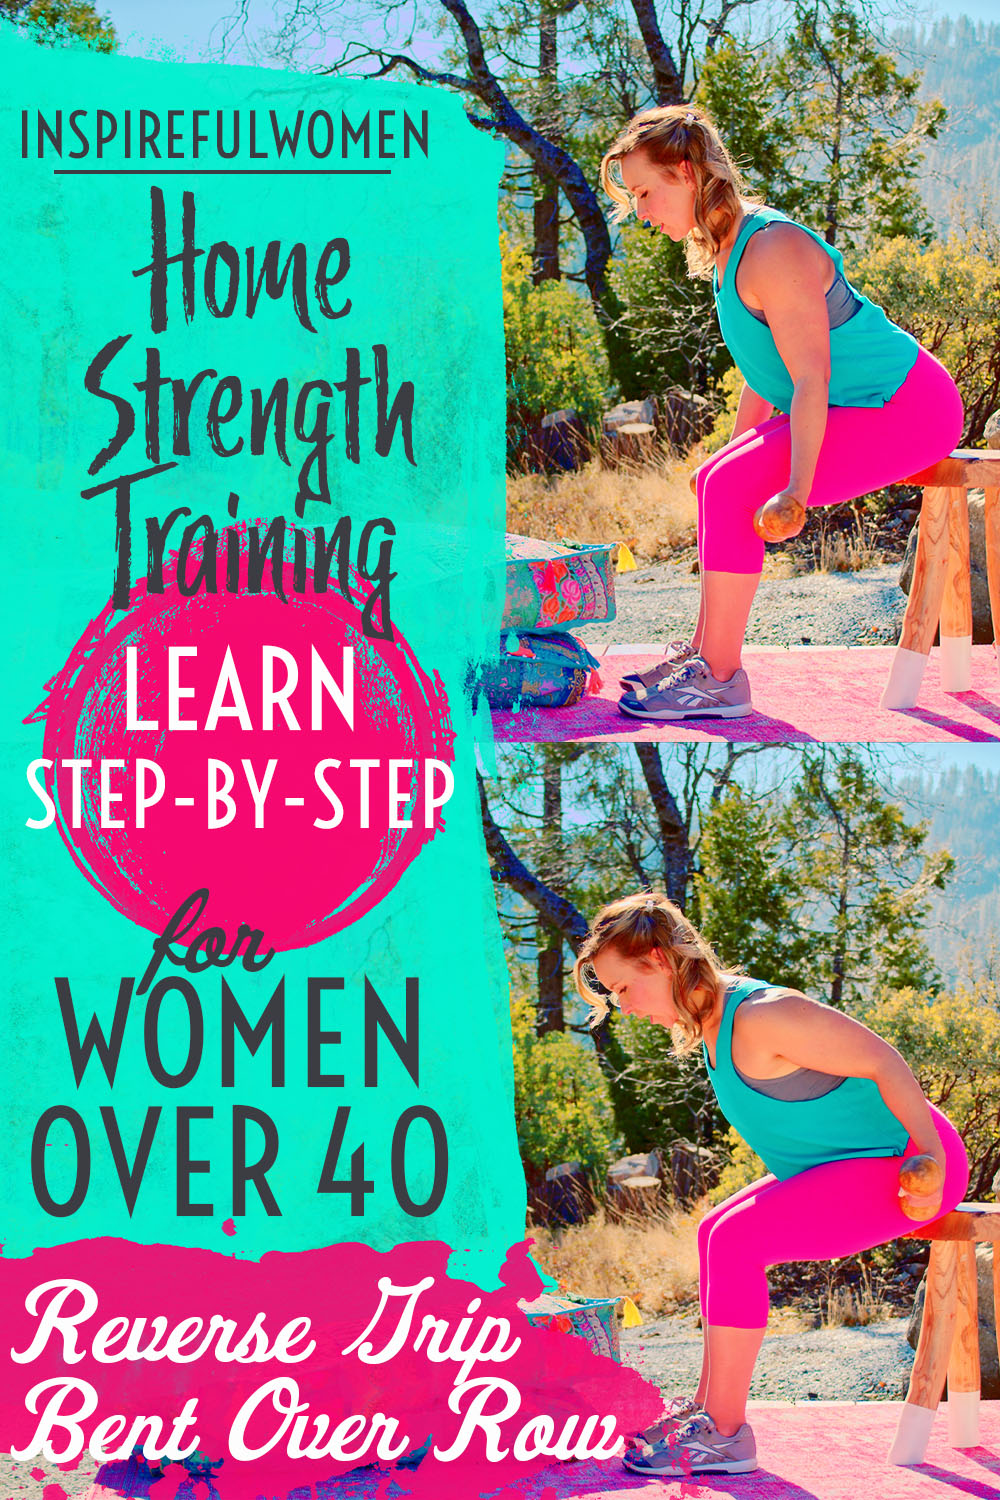 seated-chair-banded-reverse-grip-bent-over-row-resistance-training-at-home-female-40+